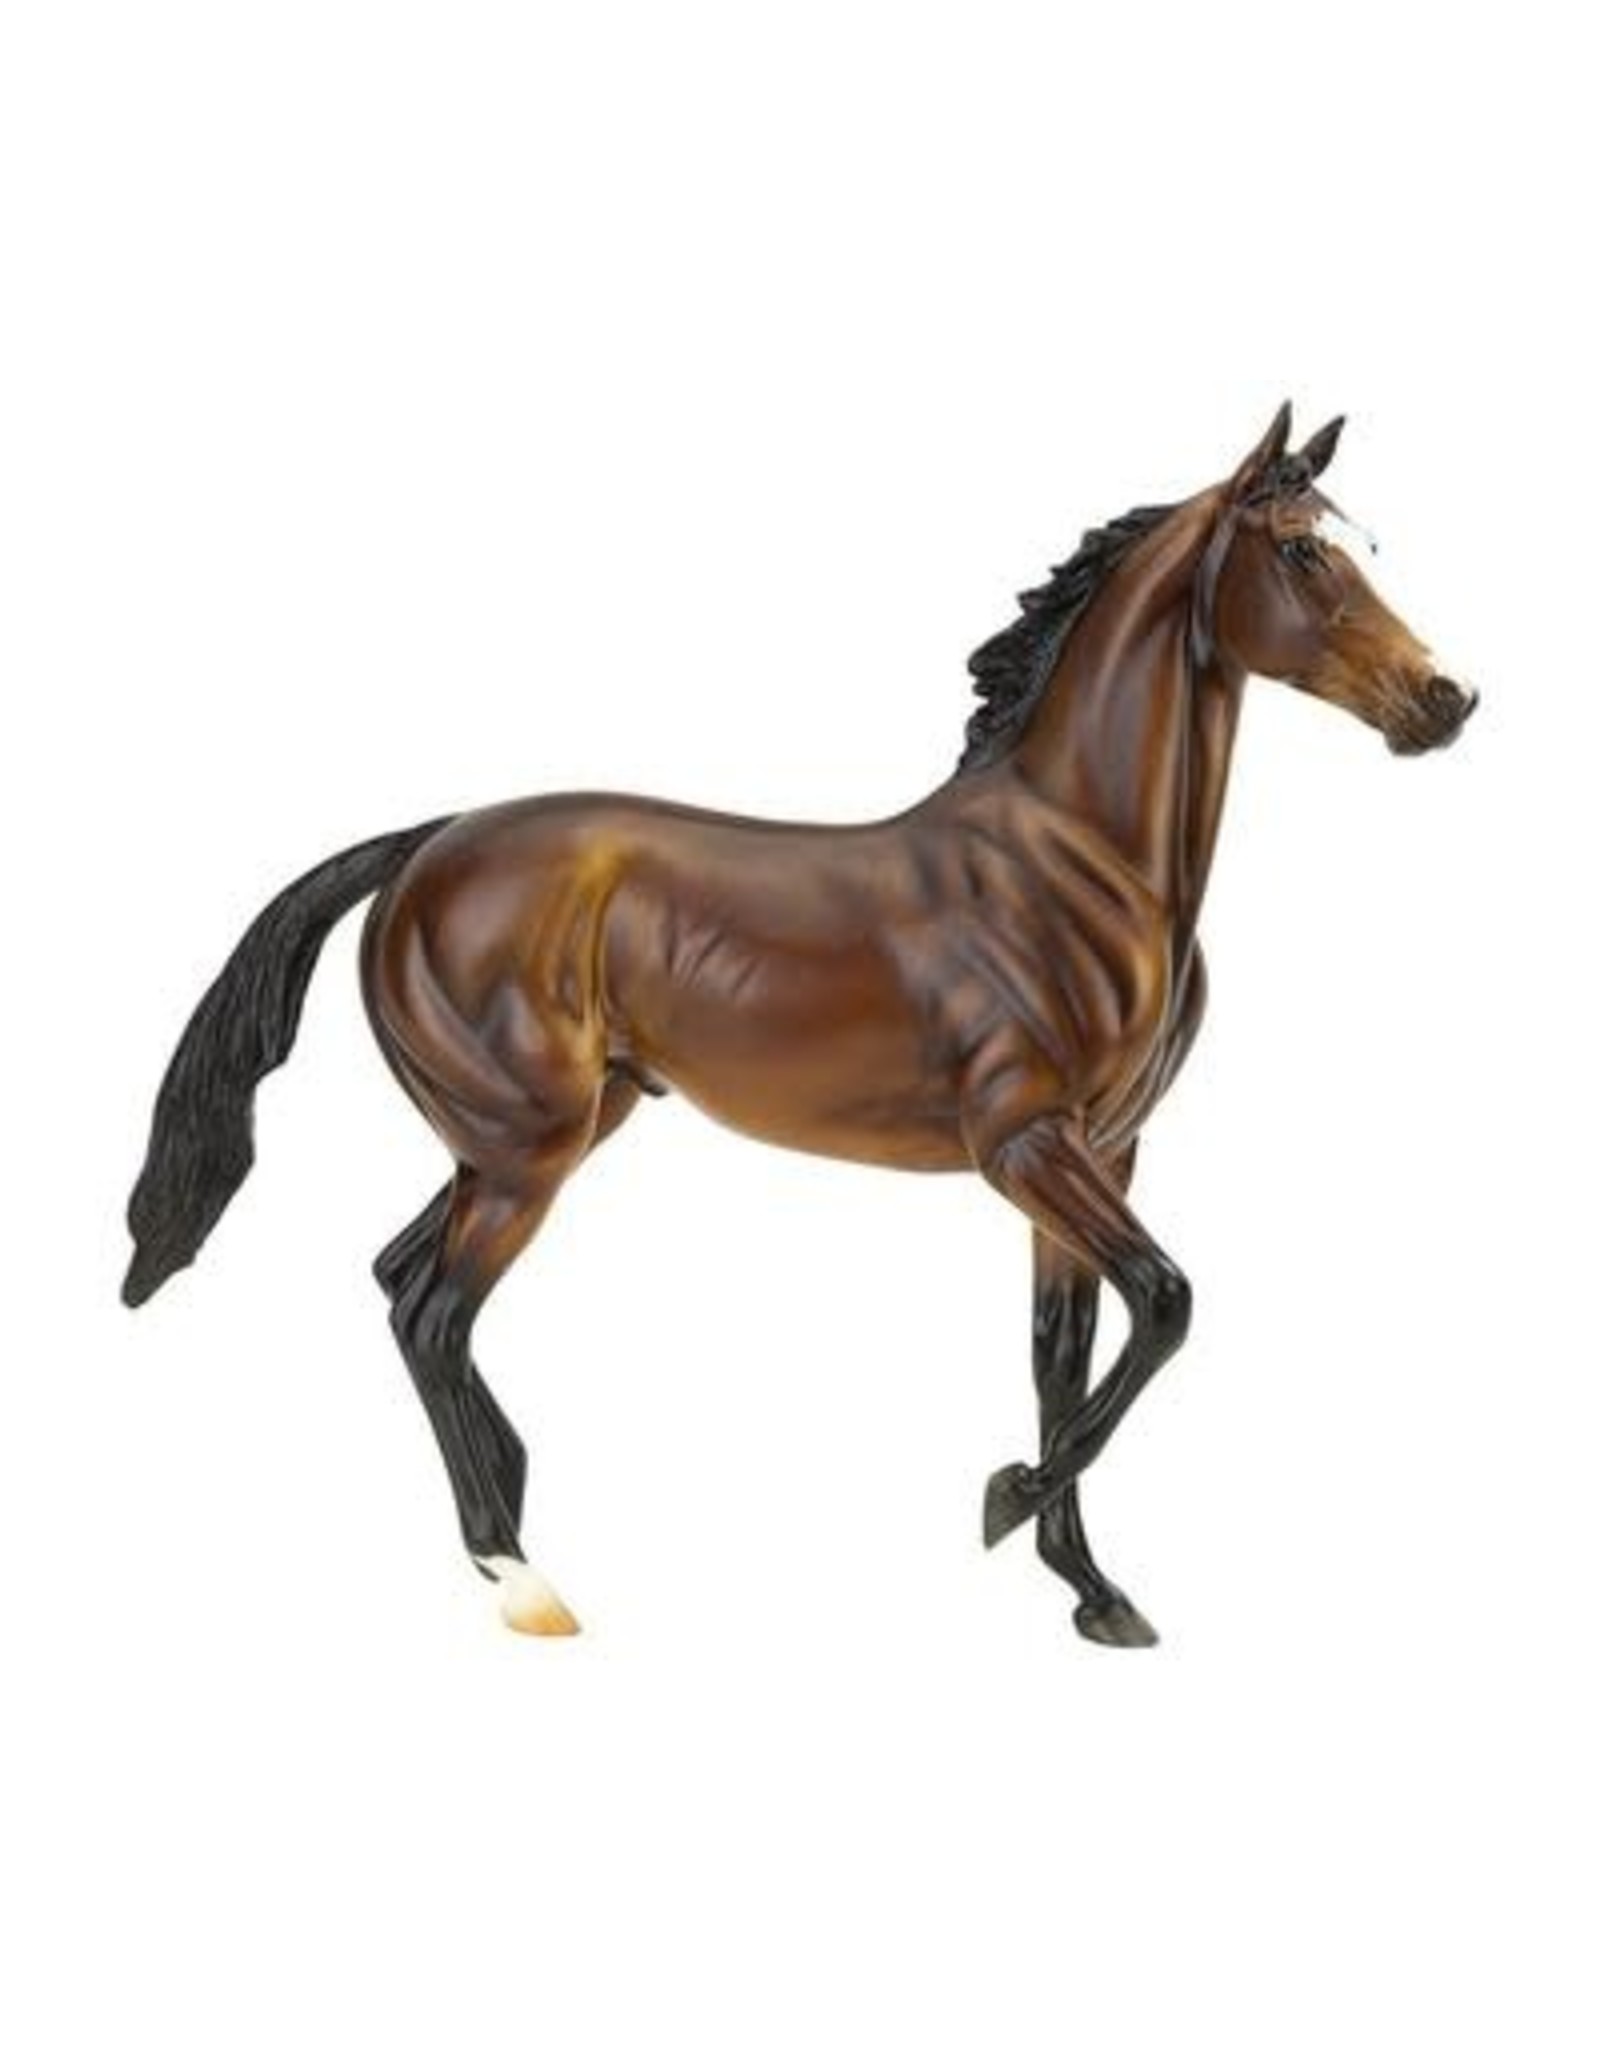 Breyer Tiz The Law Thoroughbred 1848 Traditional Model Horse